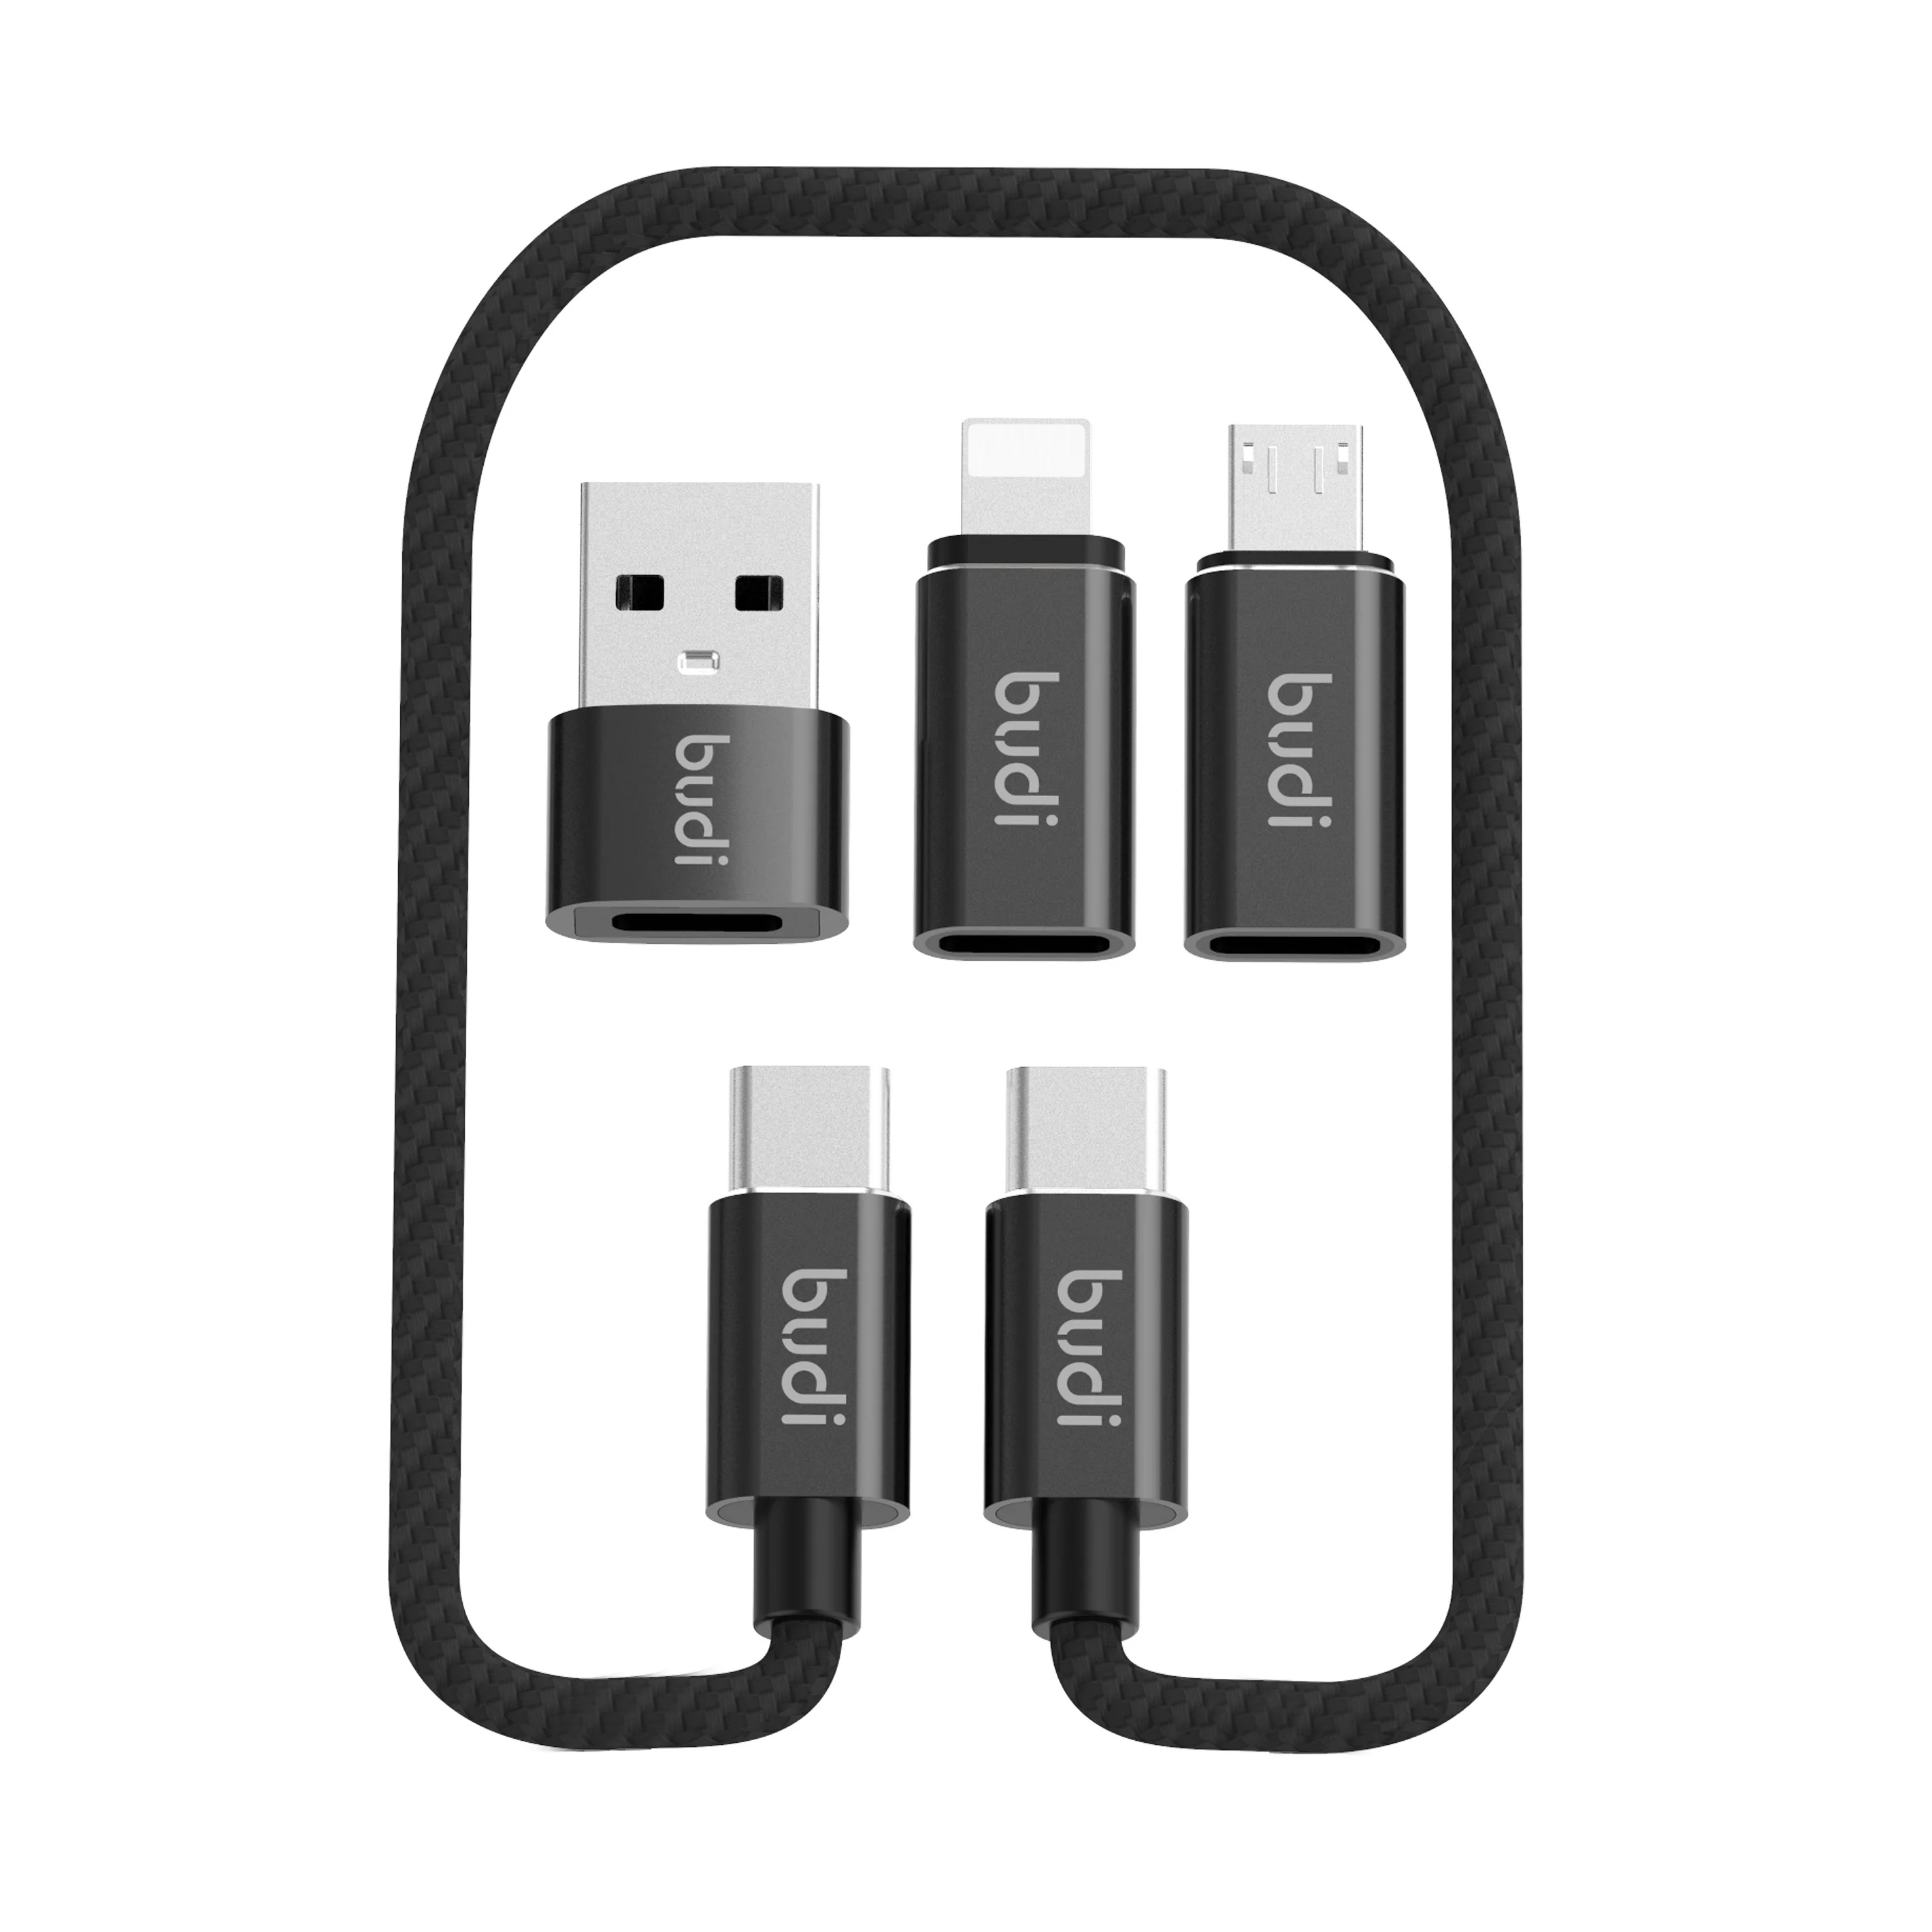 USB Adapter Cable Conversion Storage Box Multi-Type Charging Line Convertor Lightning Type C Micro Data Transfer Tool Contains Sim Card Slot Tray Eject Pin Black Use as Phone Holder 